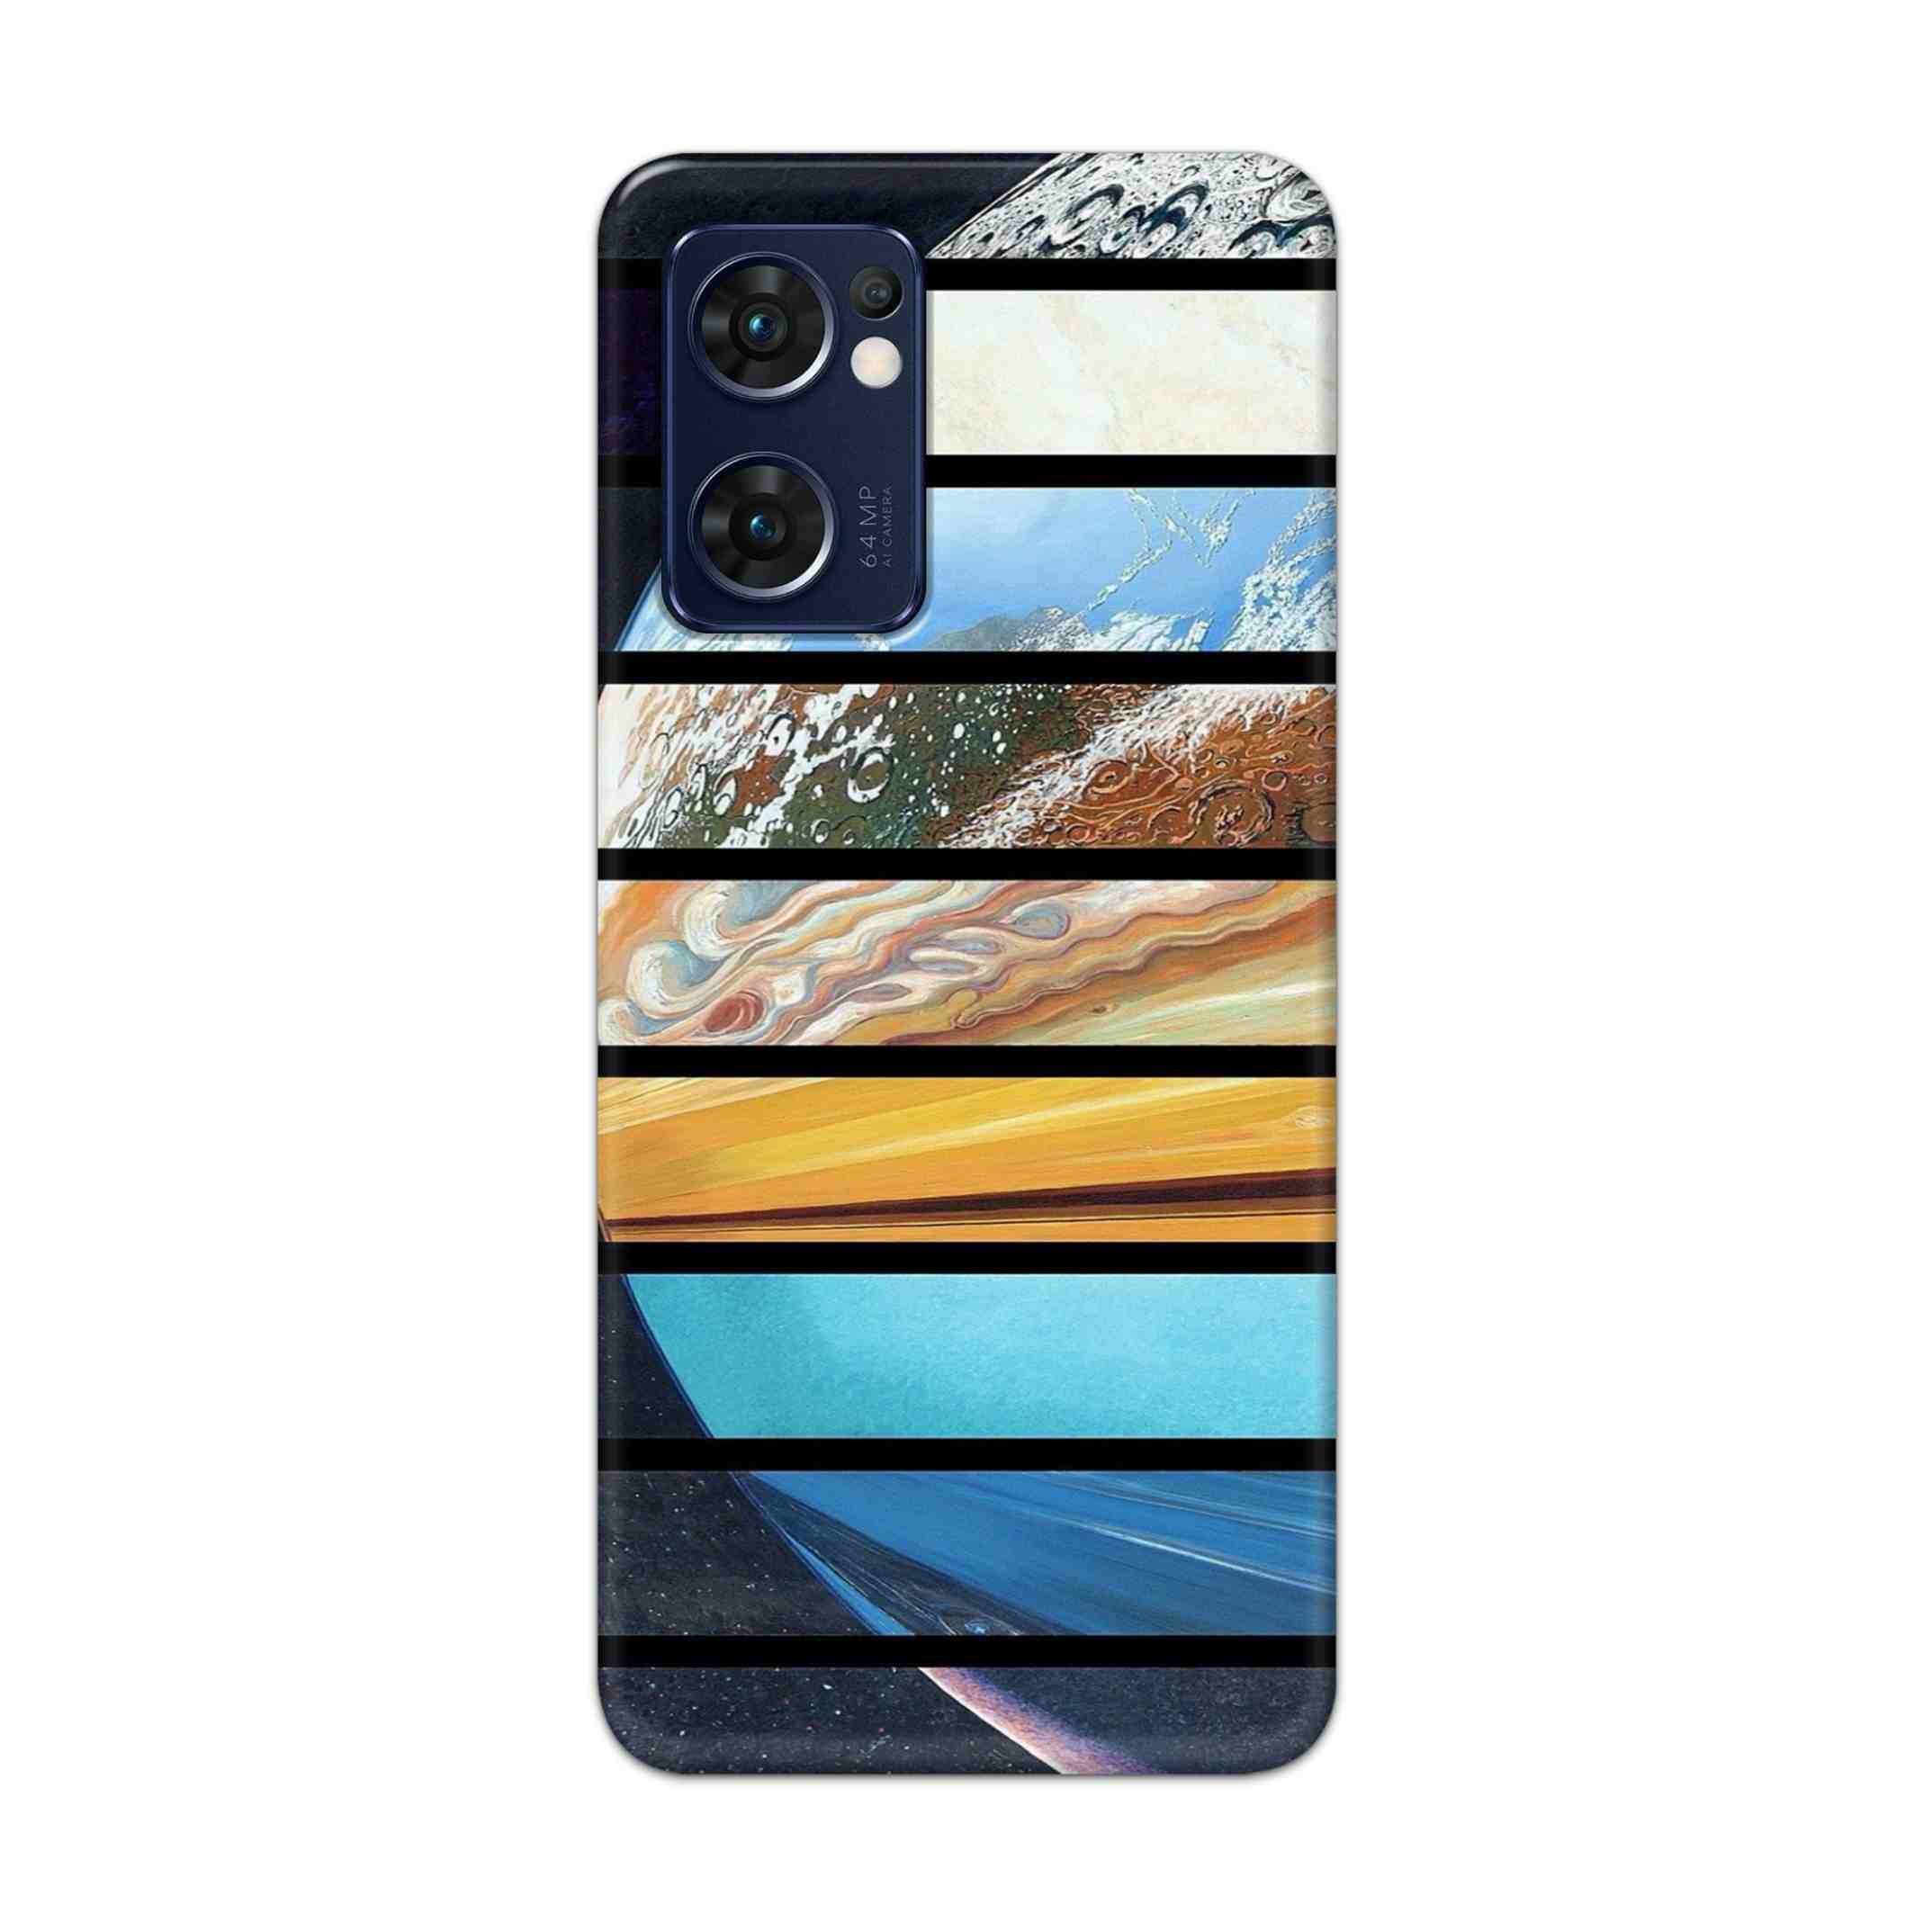 Buy Colourful Earth Hard Back Mobile Phone Case Cover For Reno 7 5G Online